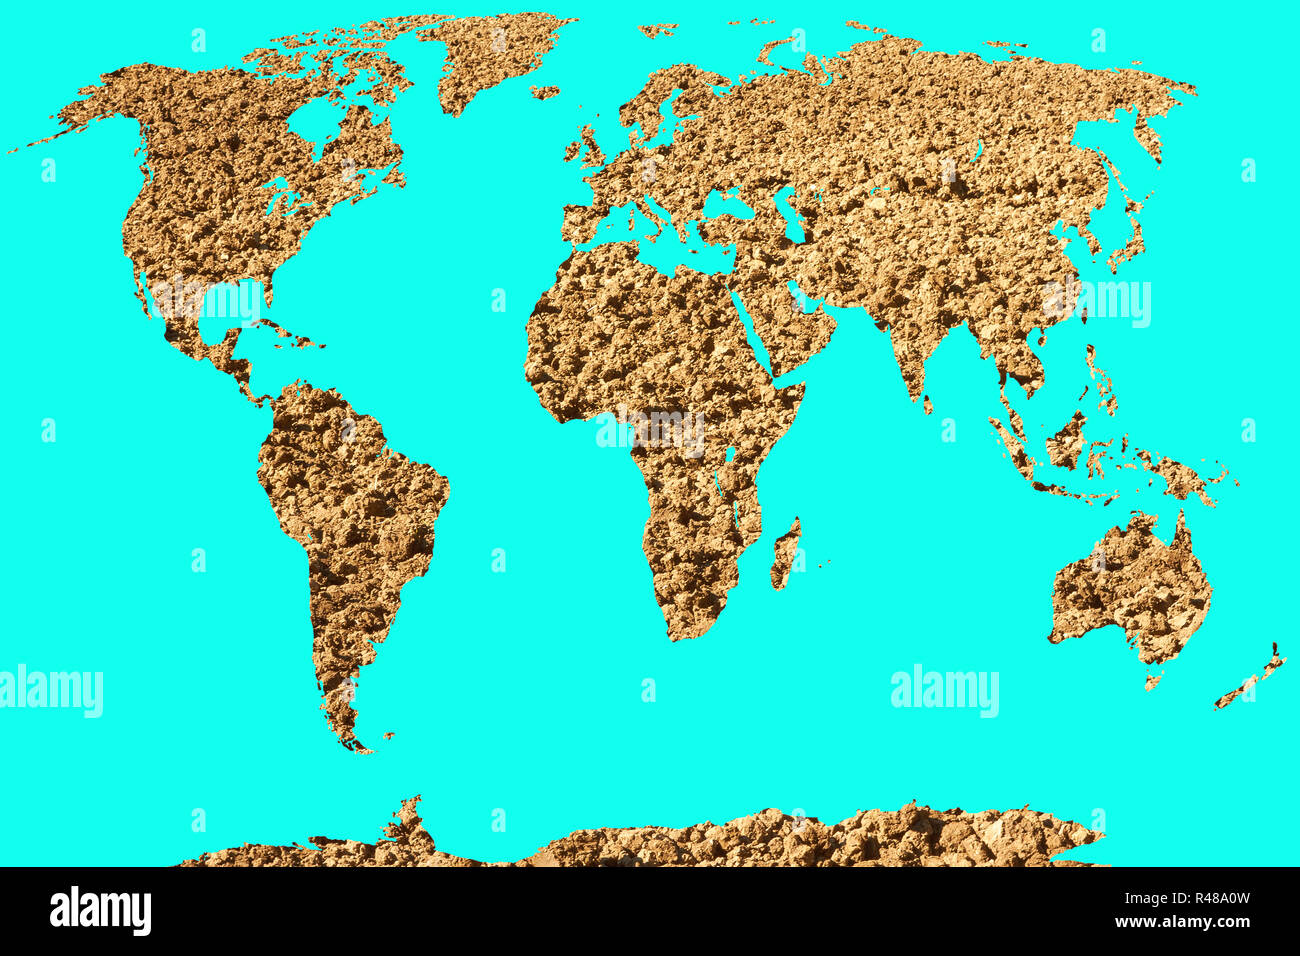 map of the world Stock Photo - Alamy